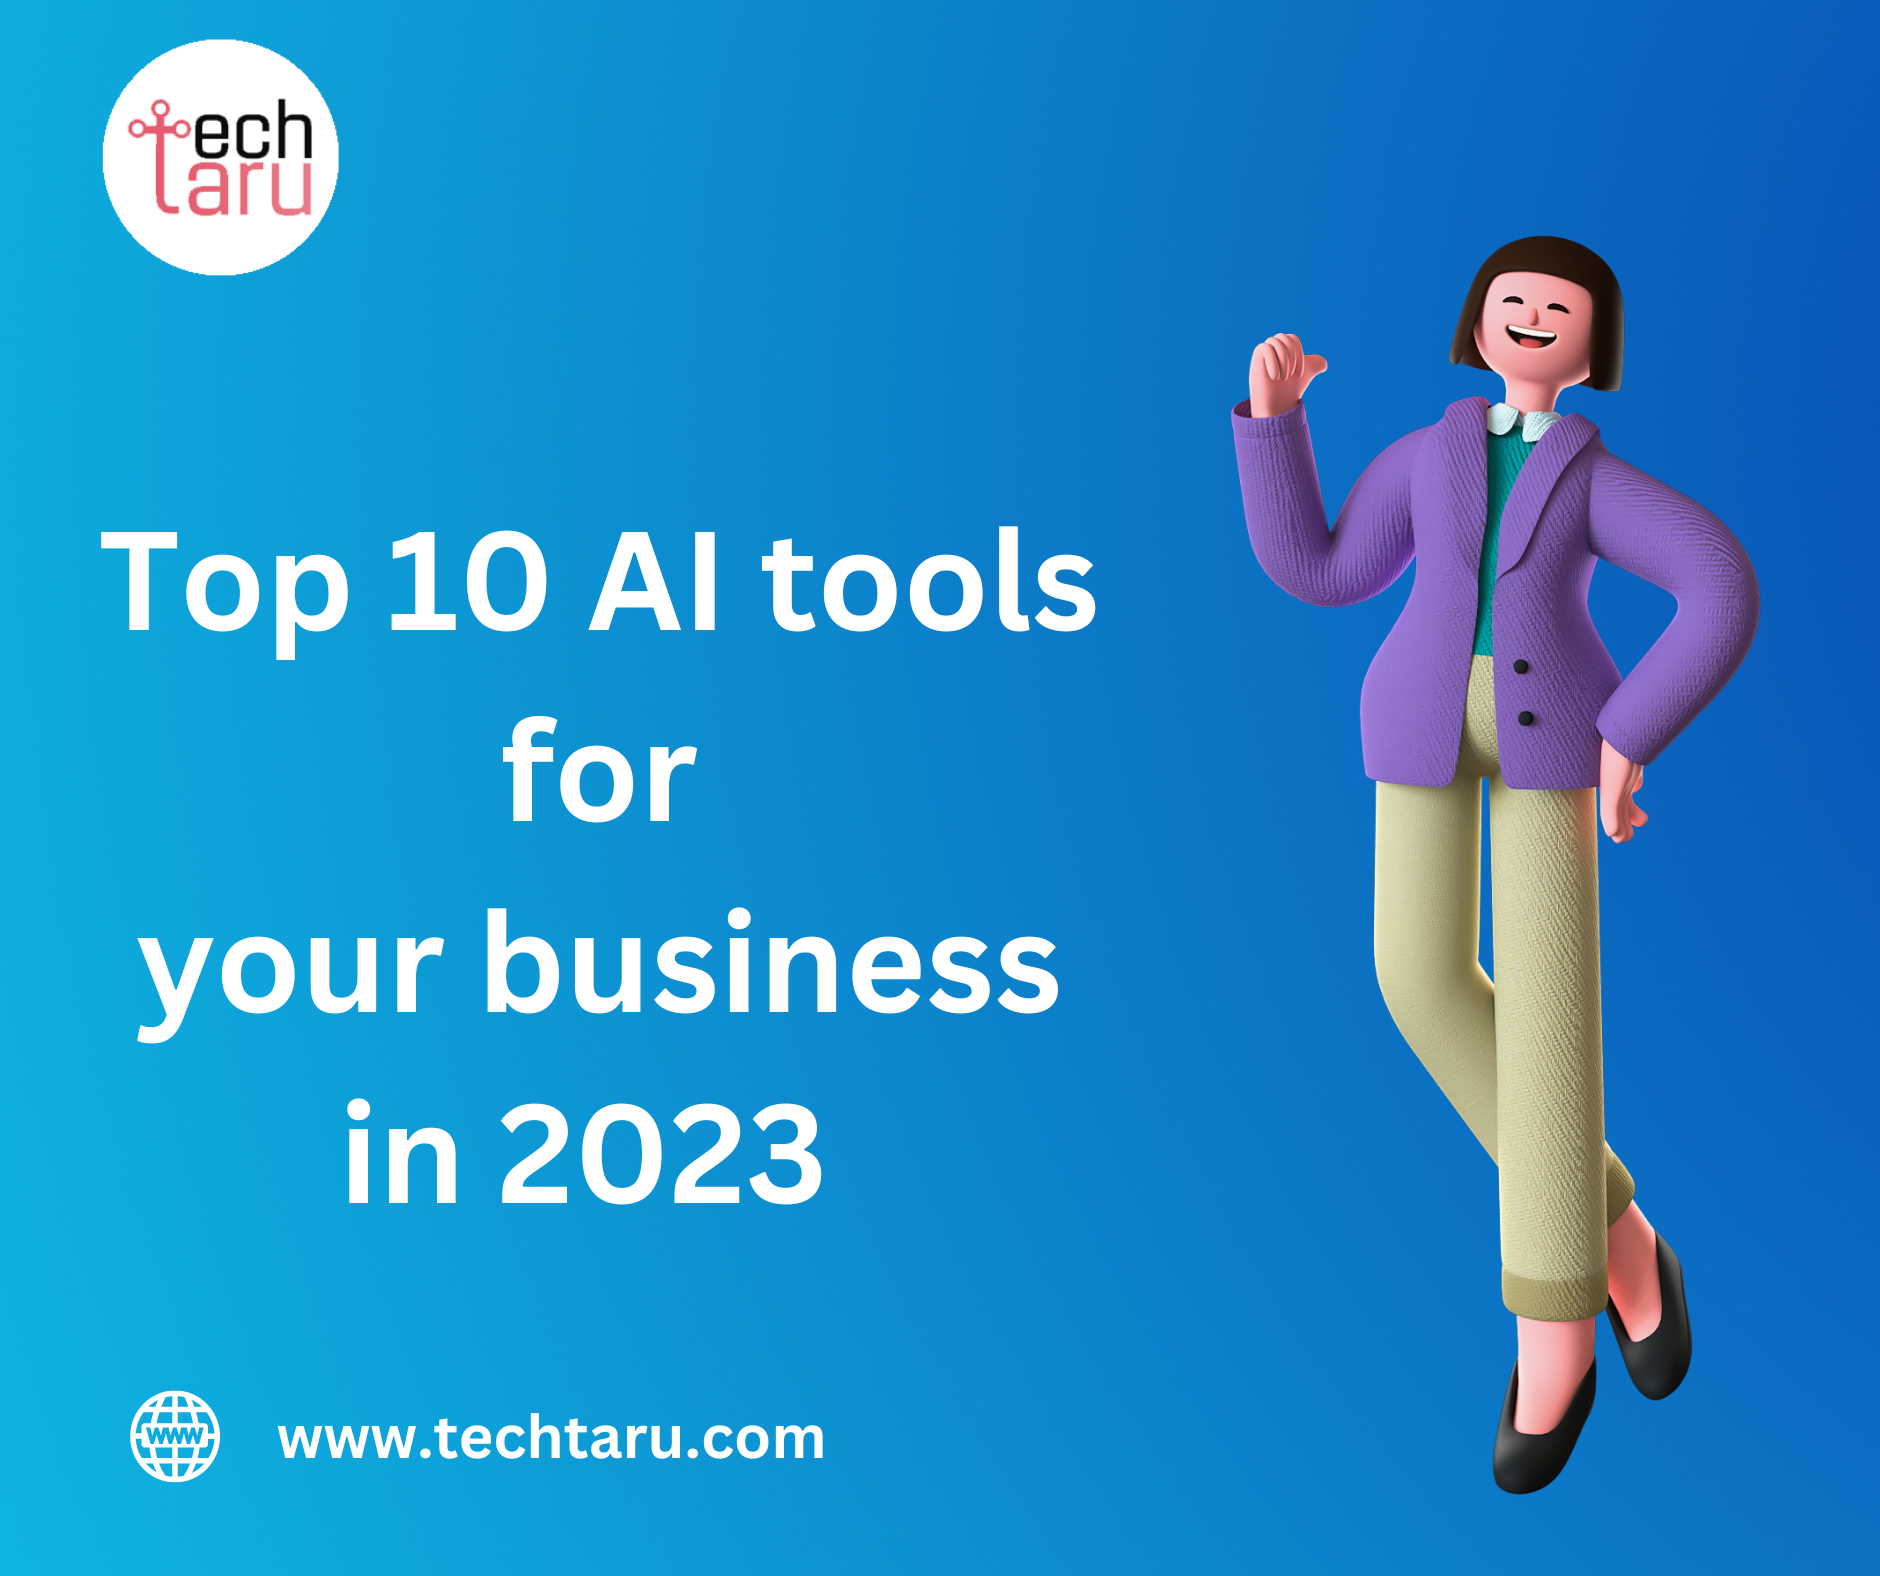 top 10 AI tools in 2023